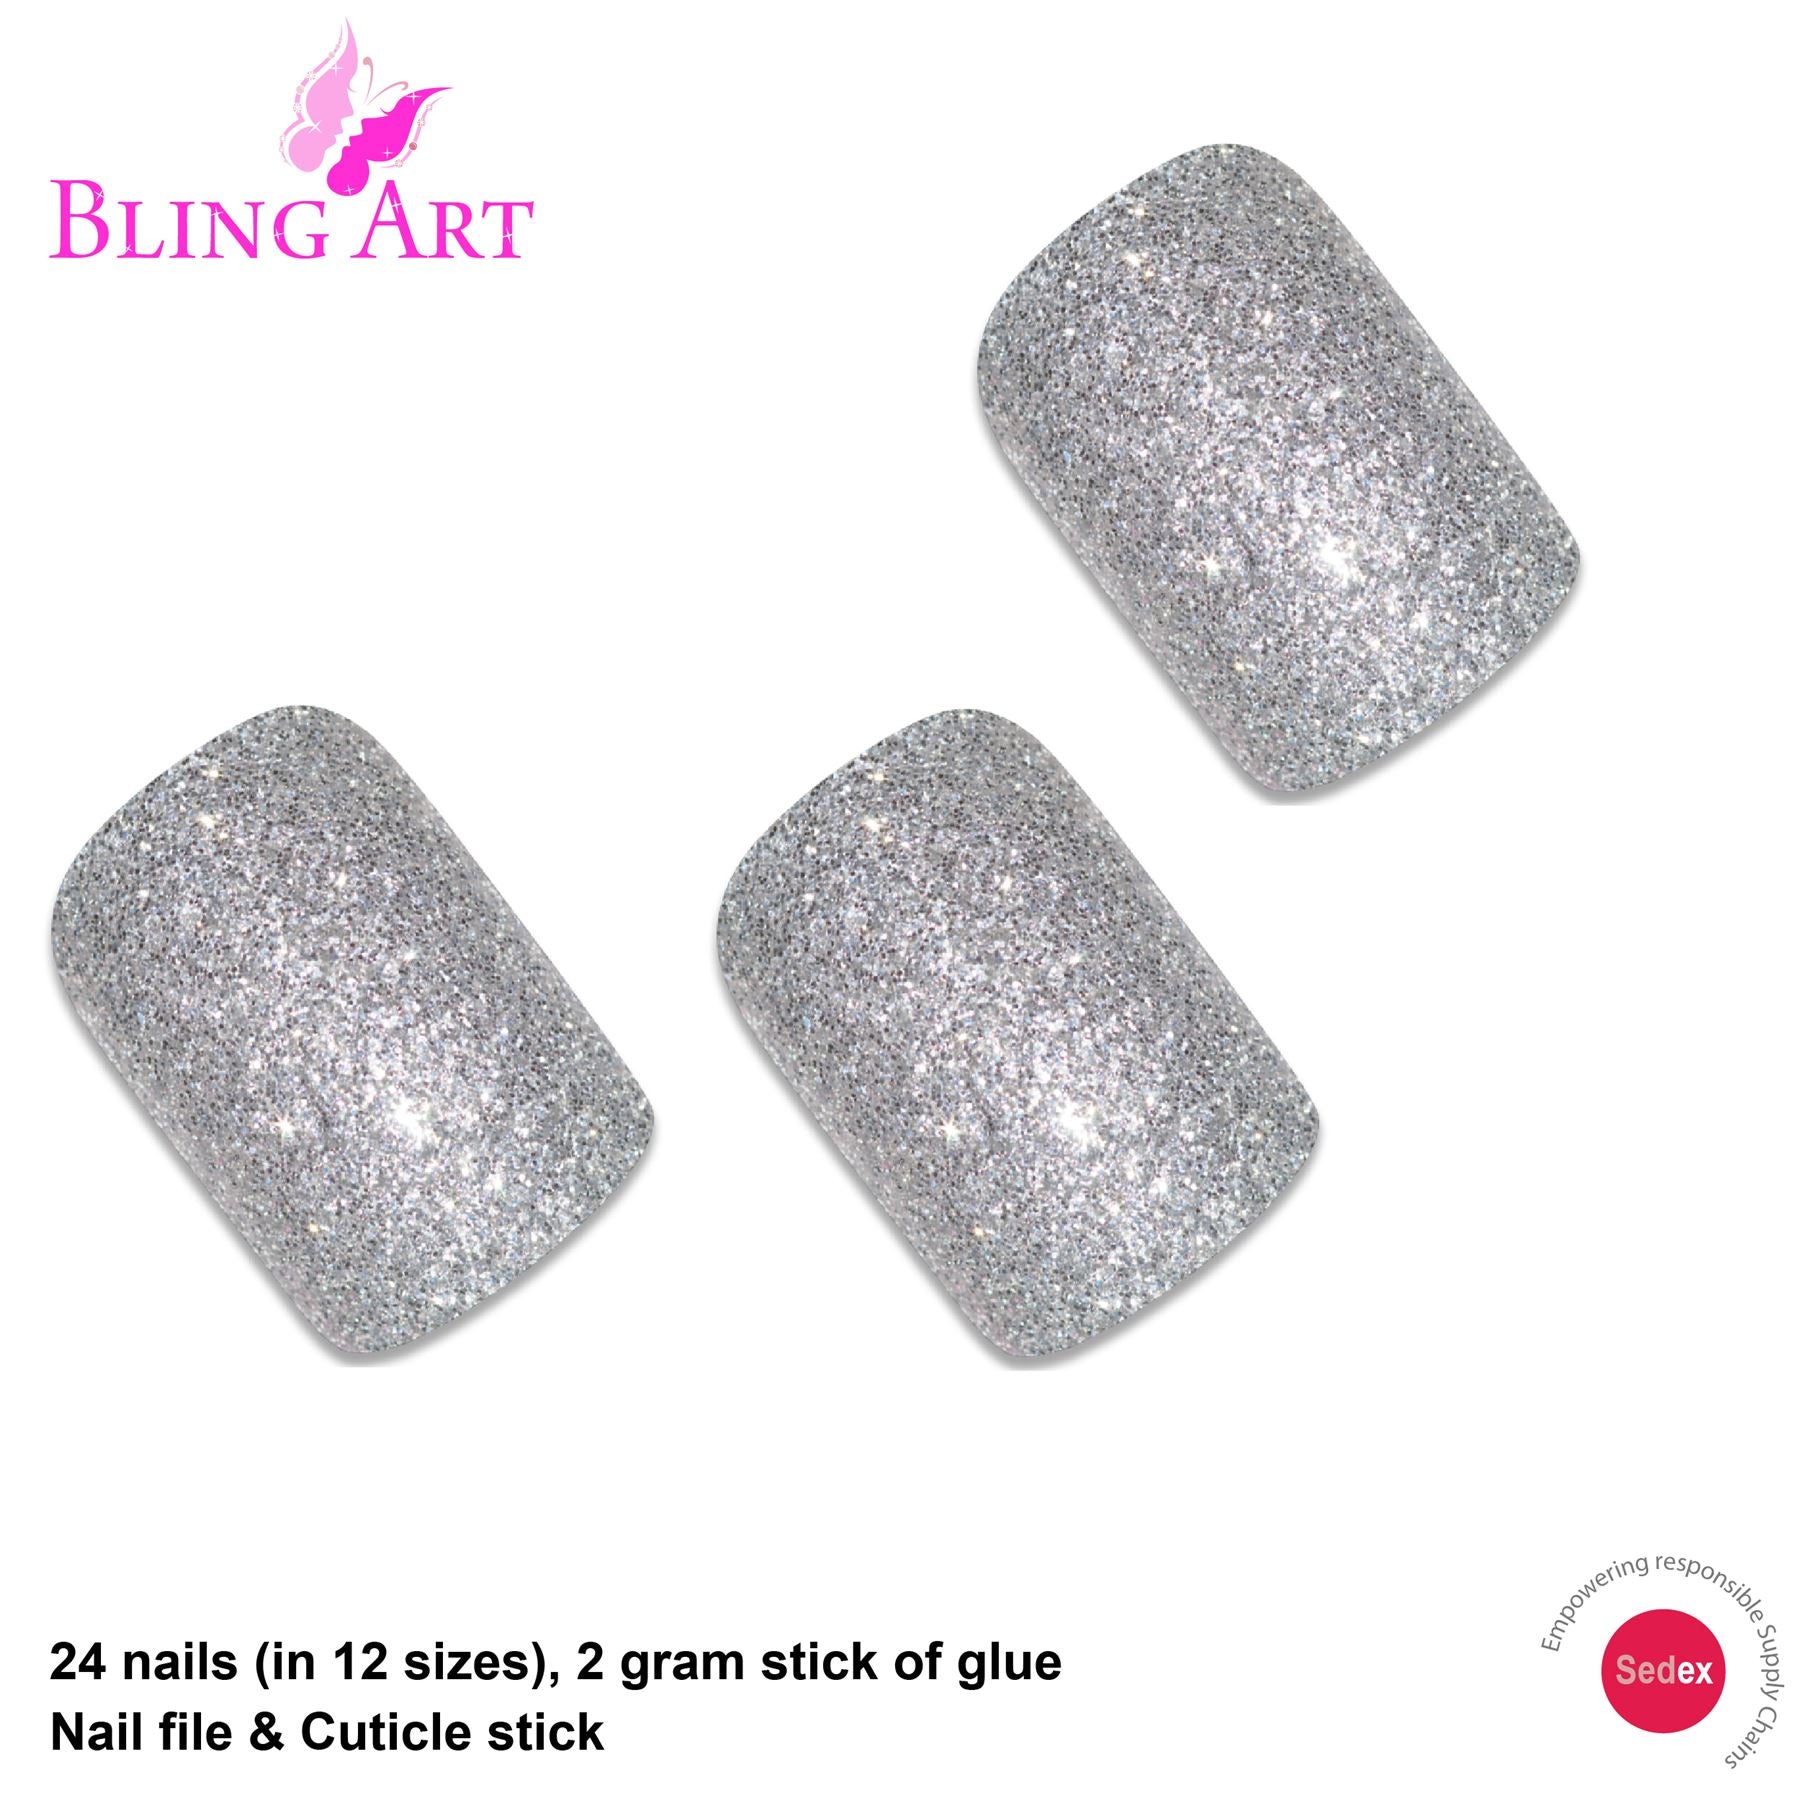 False Nails by Bling Art Silver Gel French Squoval 24 Fake Medium Acrylic Tips